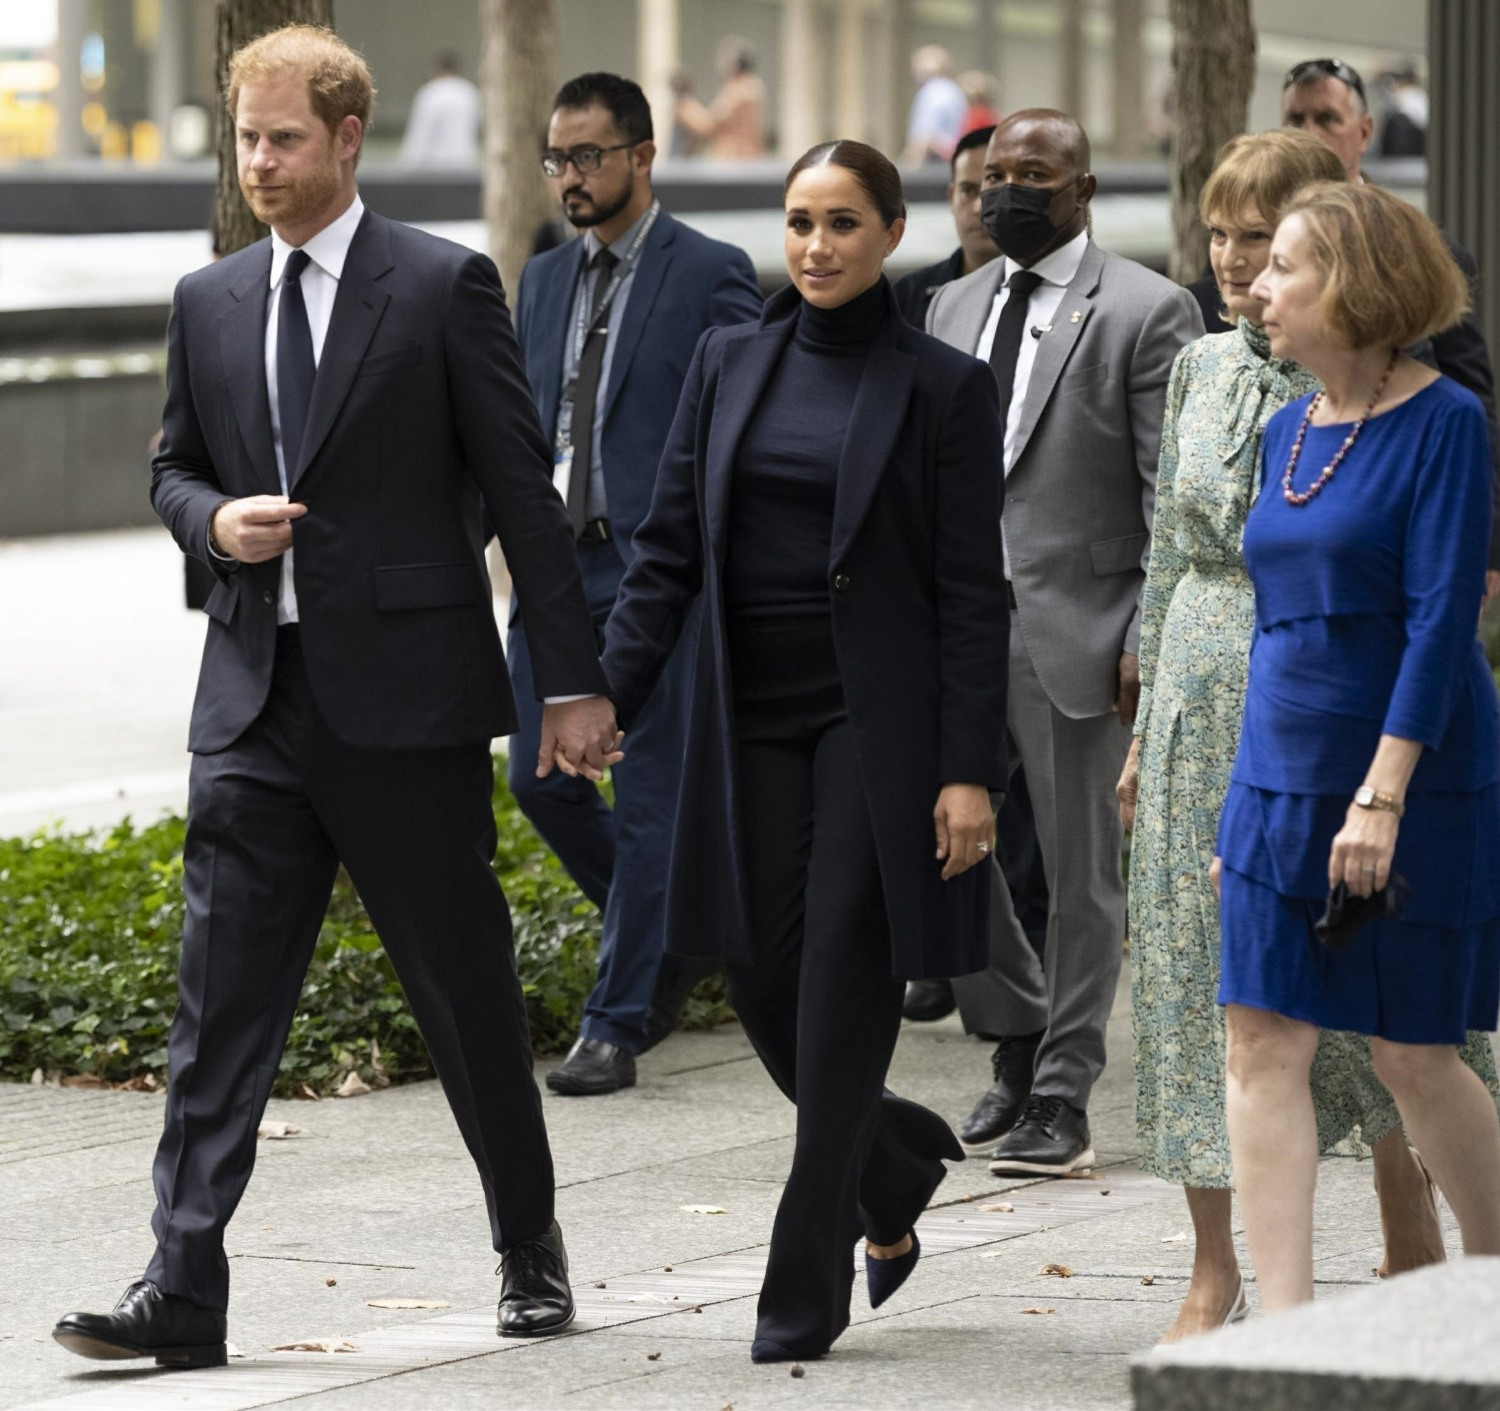 Prince Harry and Meghan Markle are seen after a visit to One World Observatory with Governor Hochul and Mayor de Blasio